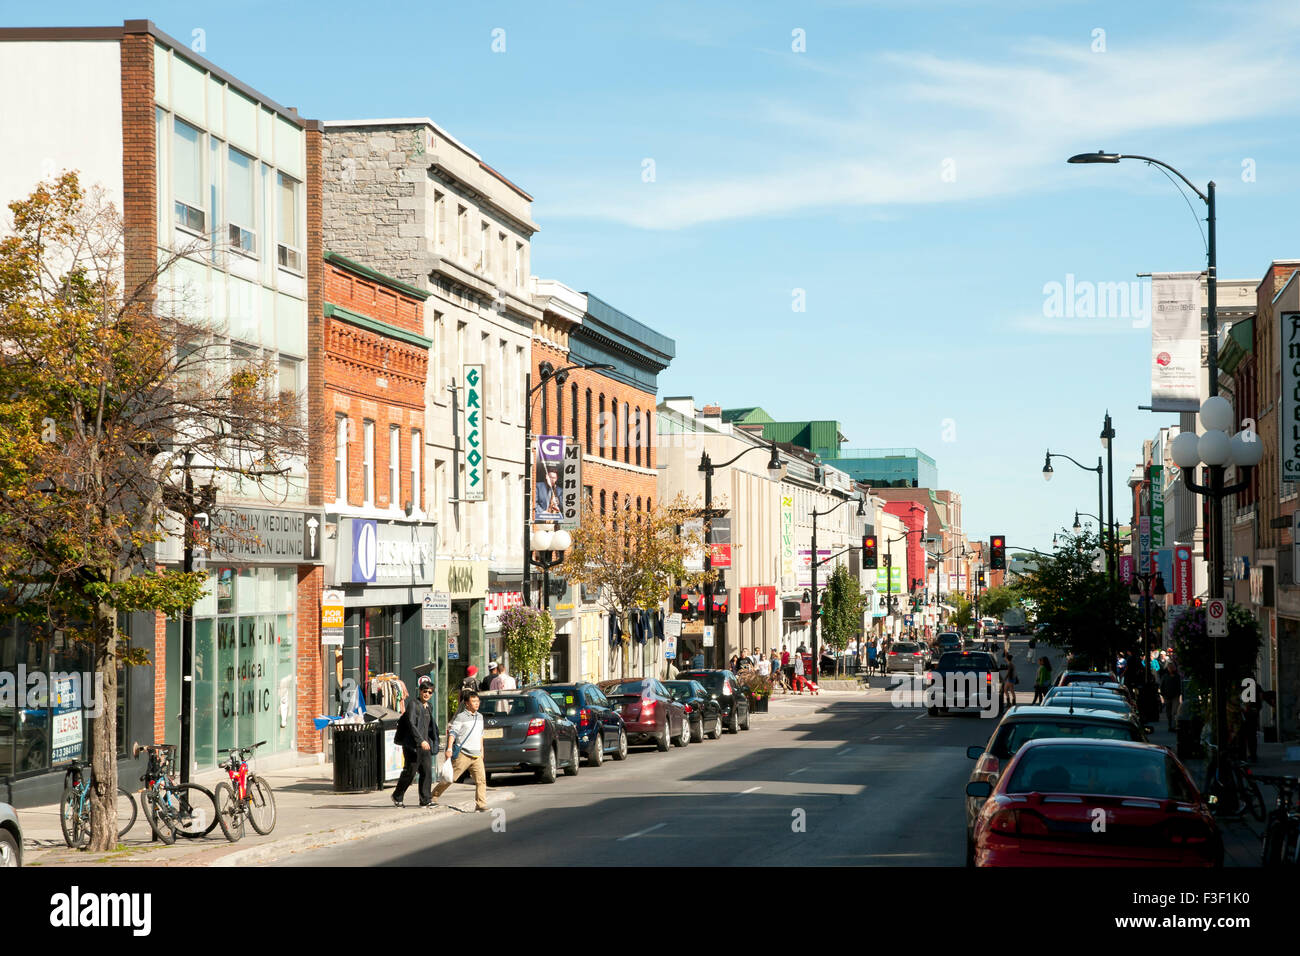 City scene on Princess street which is the main retail street of downtown Kingston Stock Photo